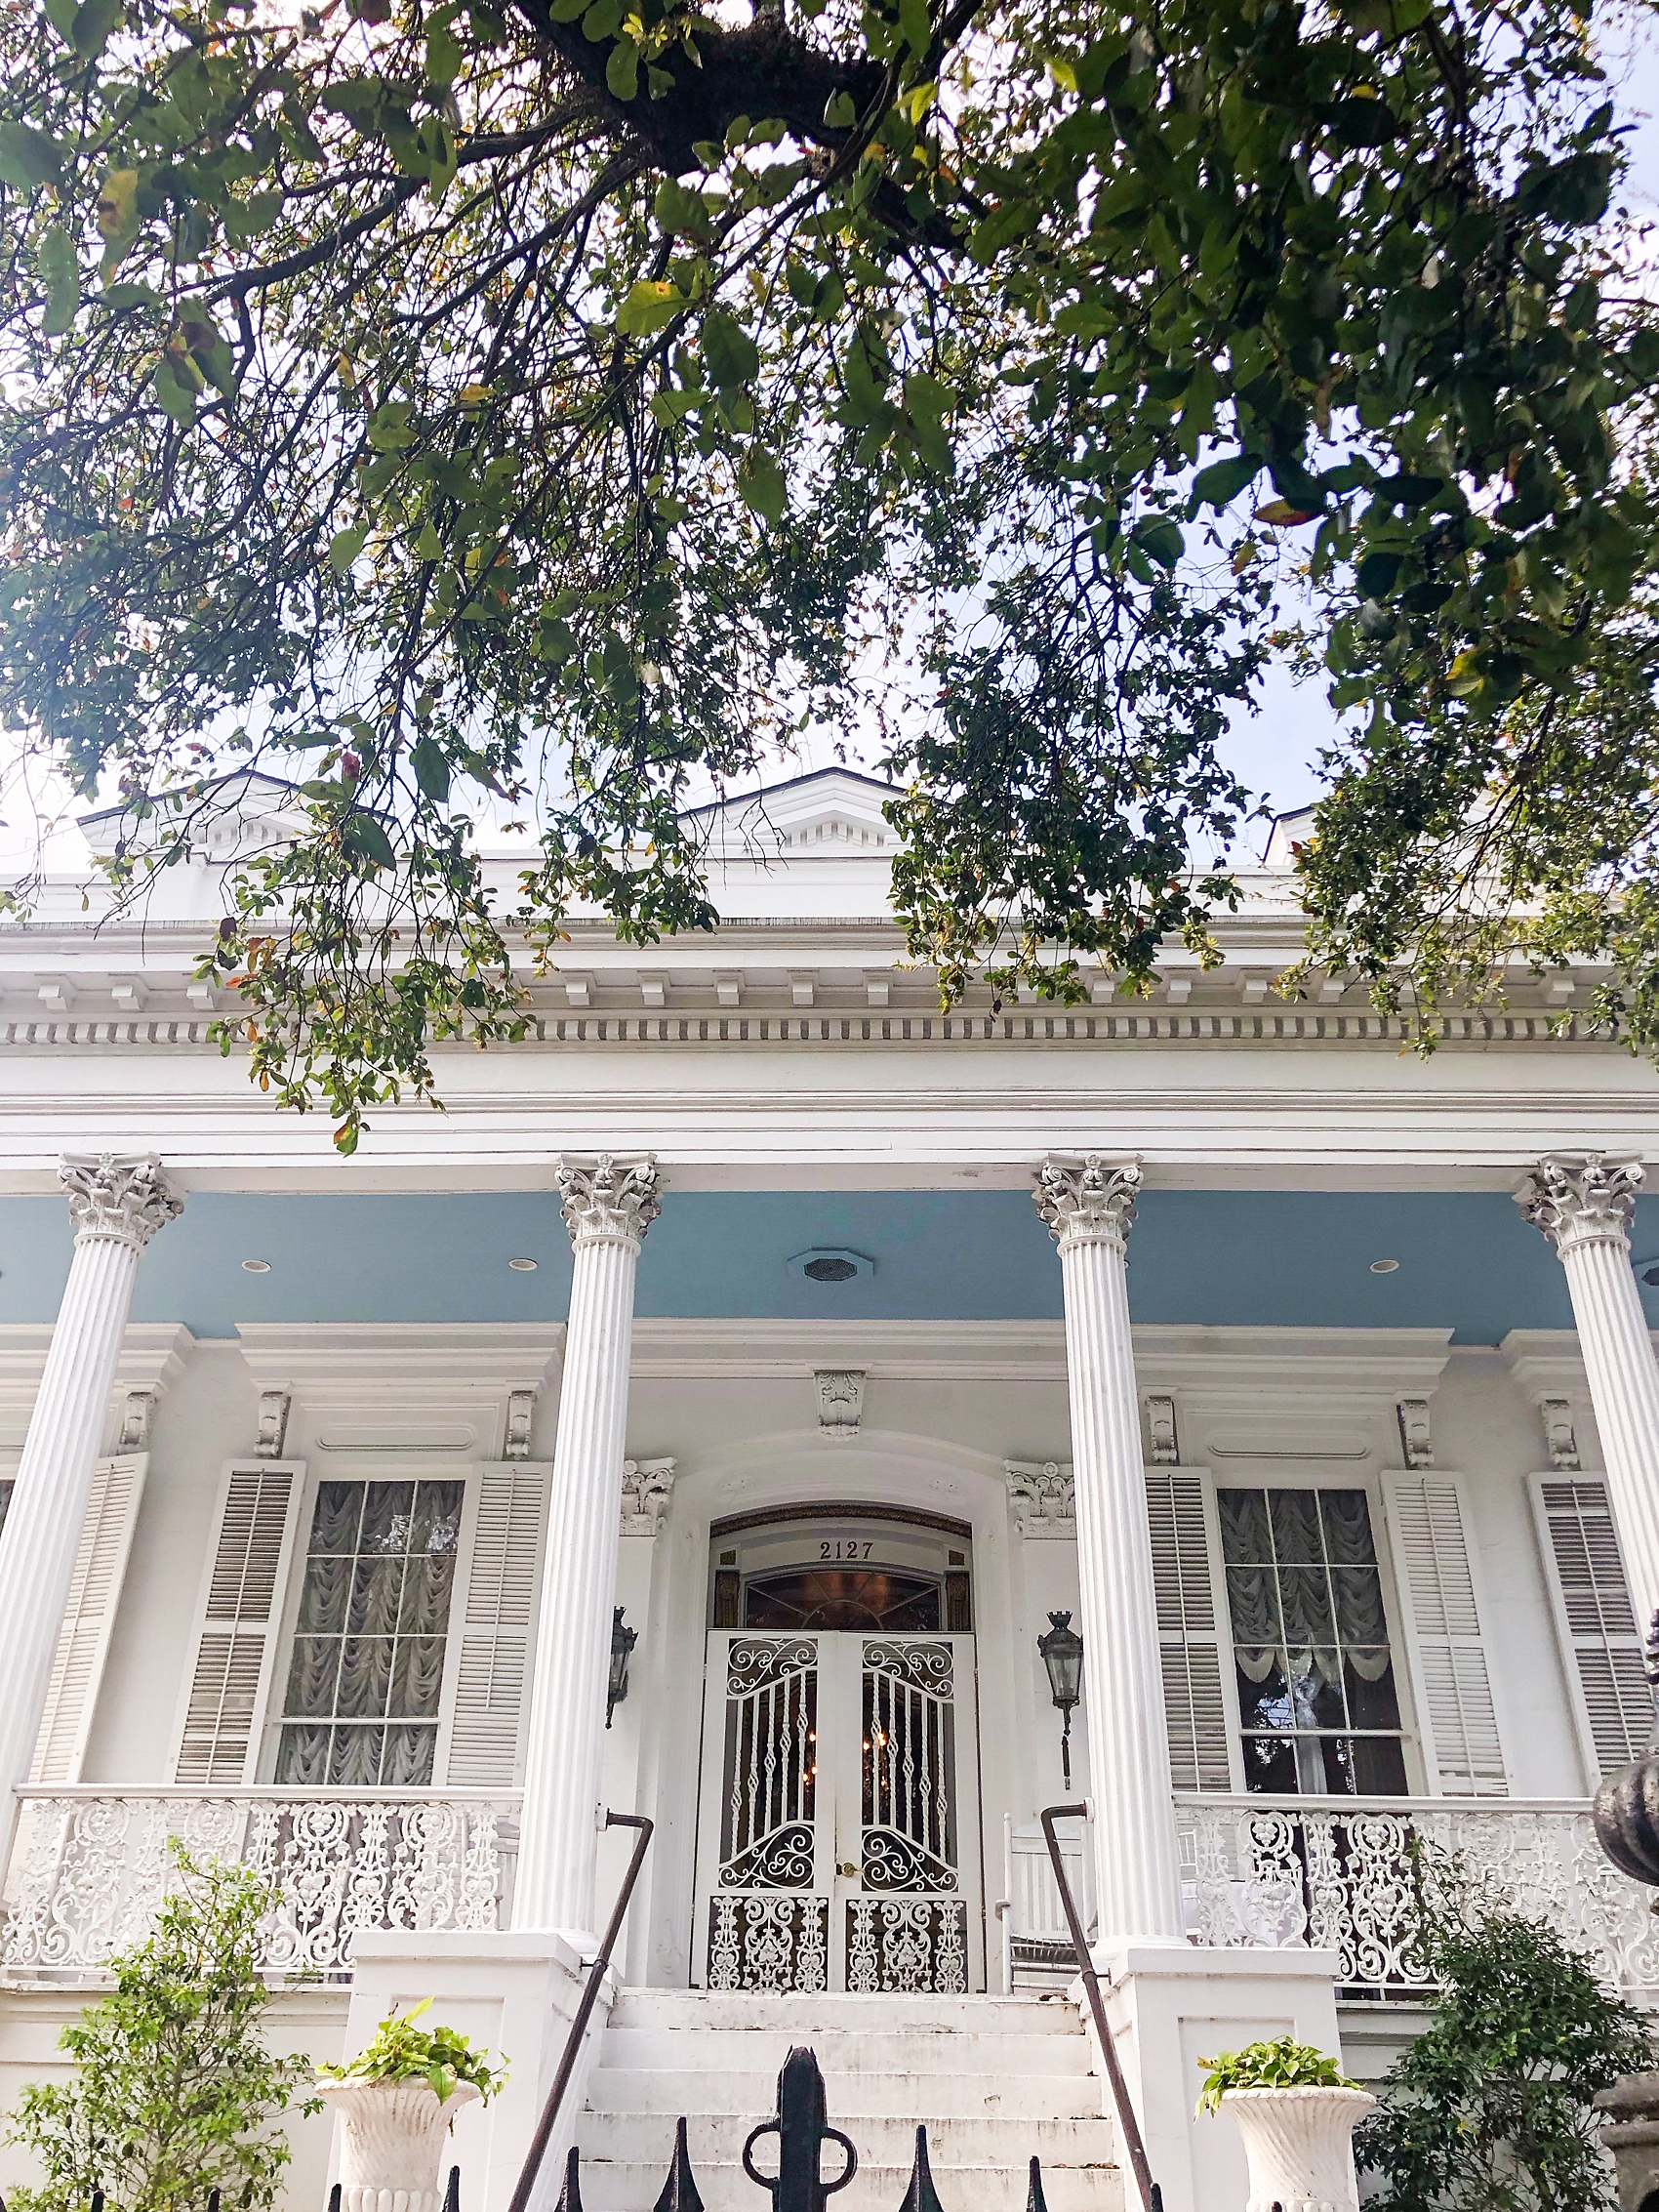 Leah Hope Photography | New Orleans, Louisiana | Traveling Photographer | NOLA | The Big Easy | Oak Alley Plantation | The French Quarter | The Garden District | City Park 